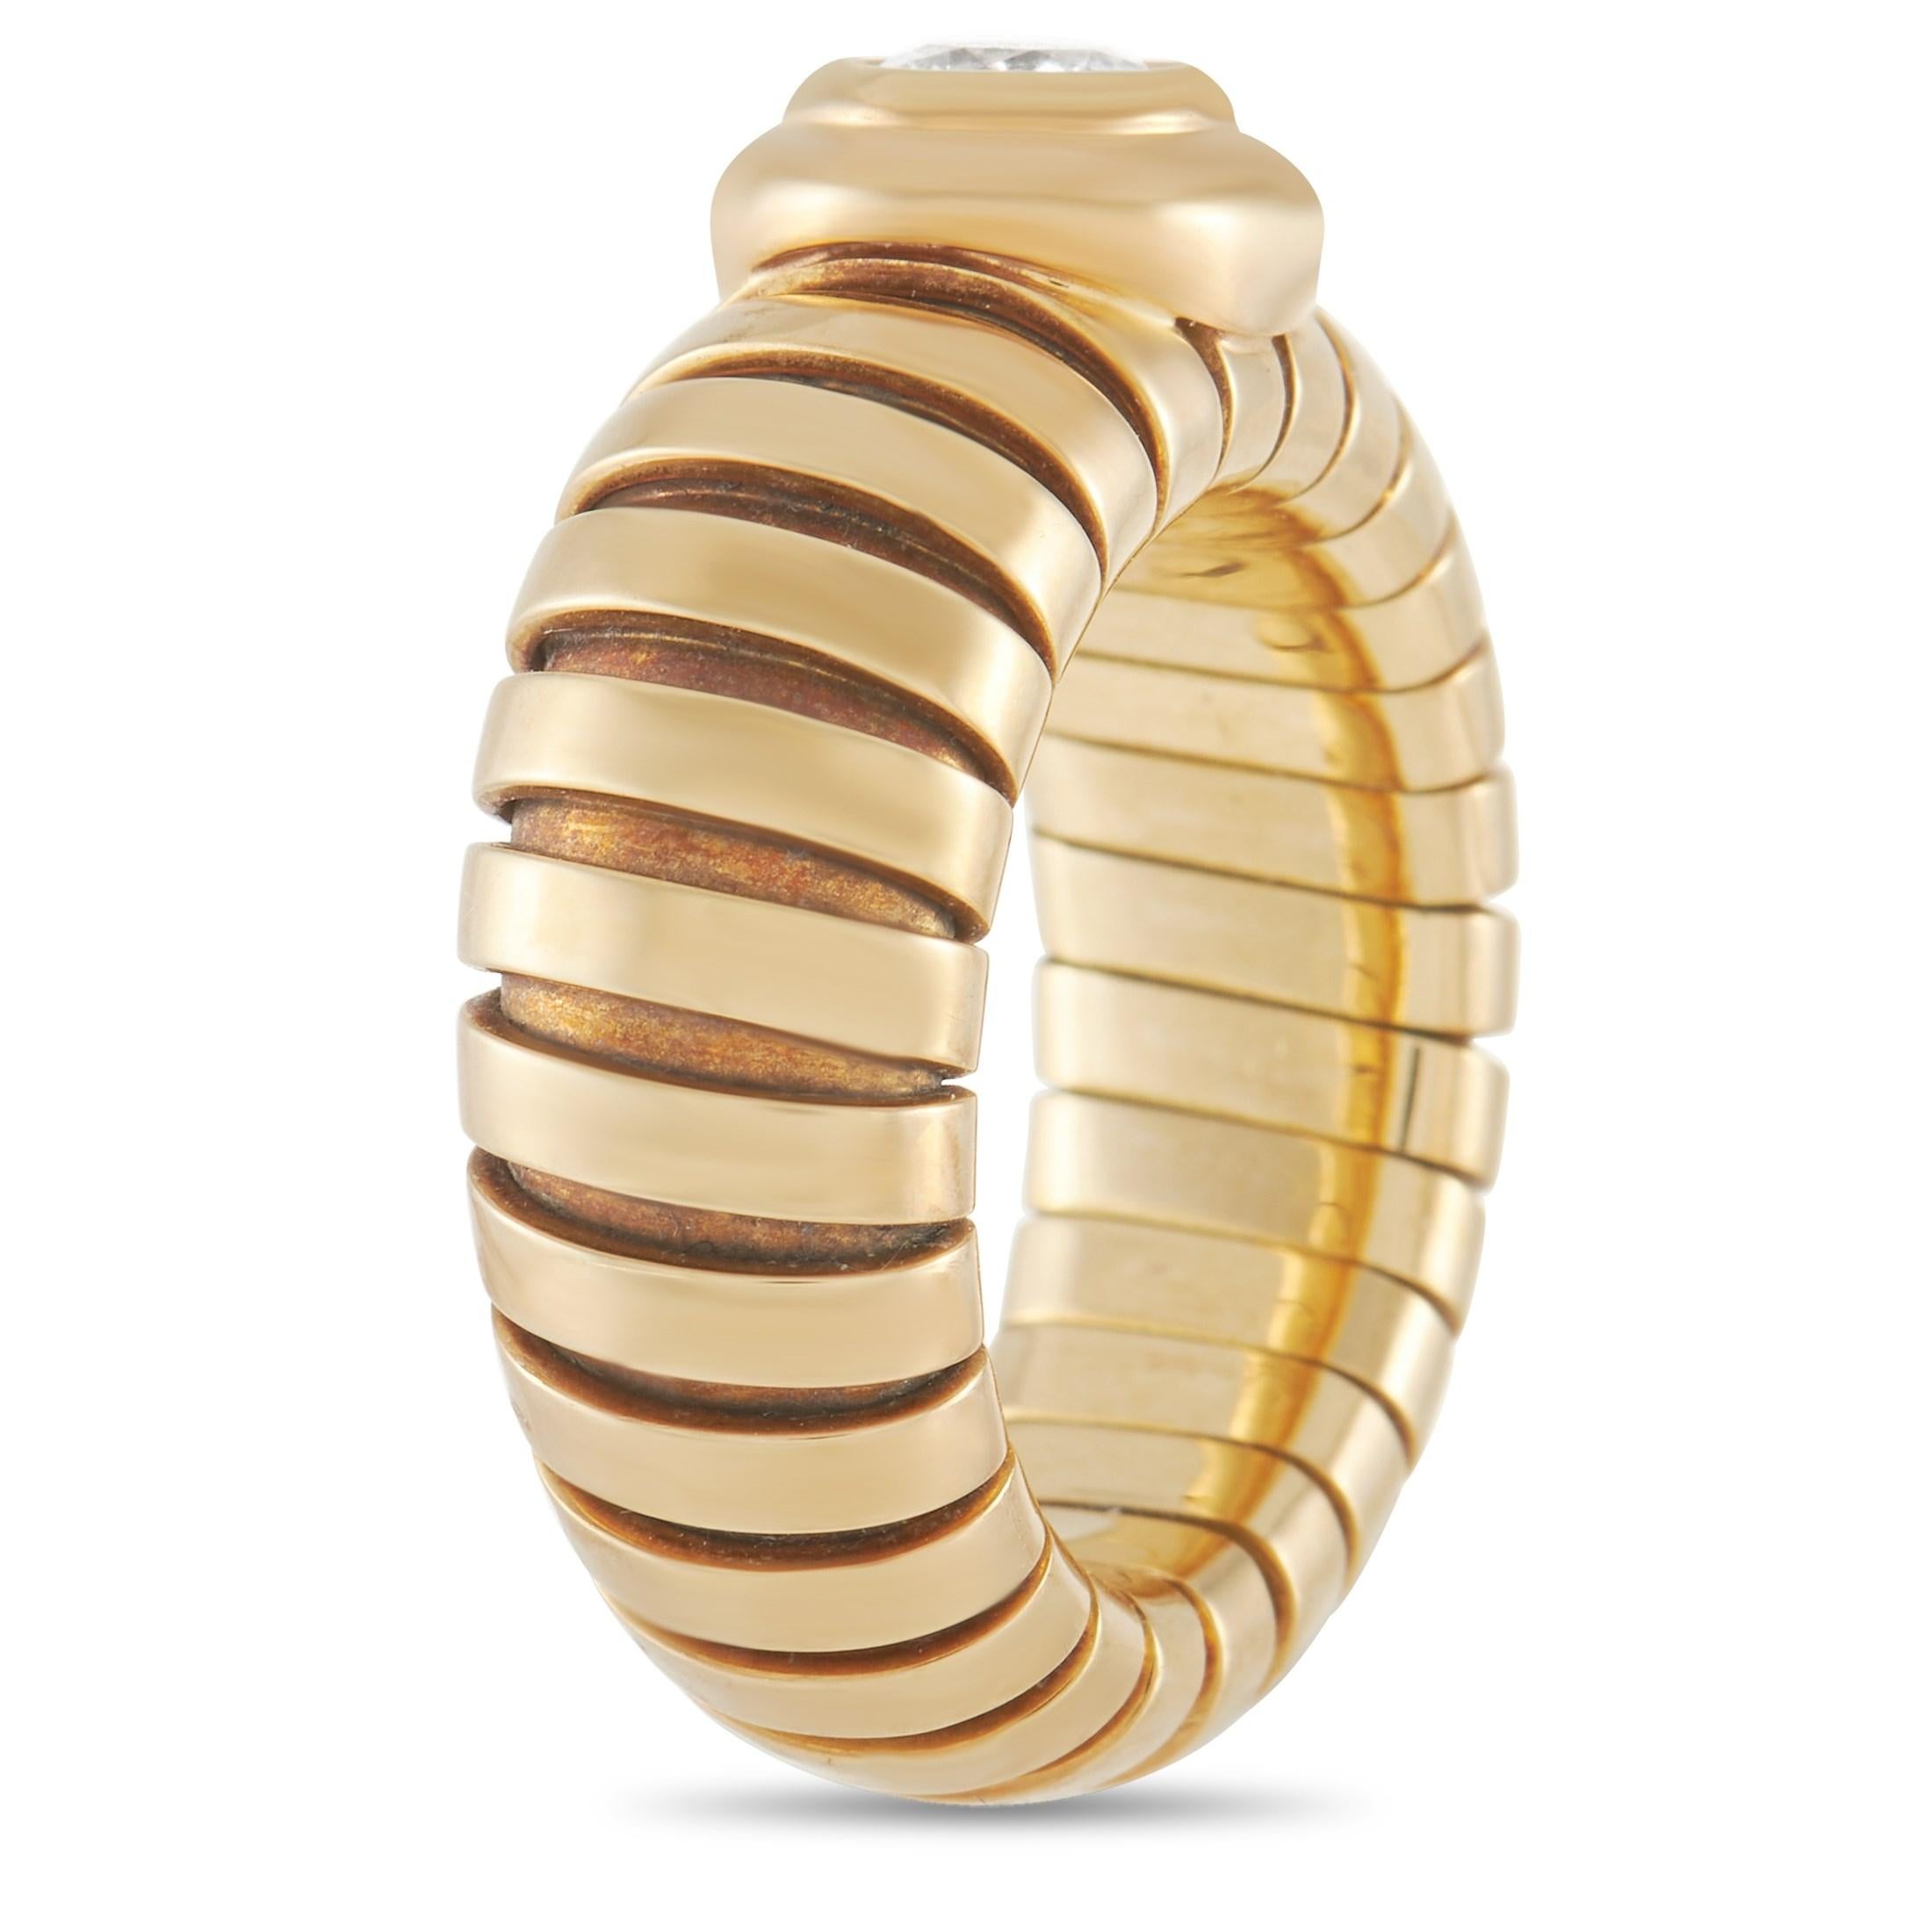 This bold ring from the Bvlgari Tubogas collection is an eye-catching statement piece. The band is made with 18K yellow gold and features almost cut like striations around the outside of the ring. The face of the ring is set with a 0.50 carat round